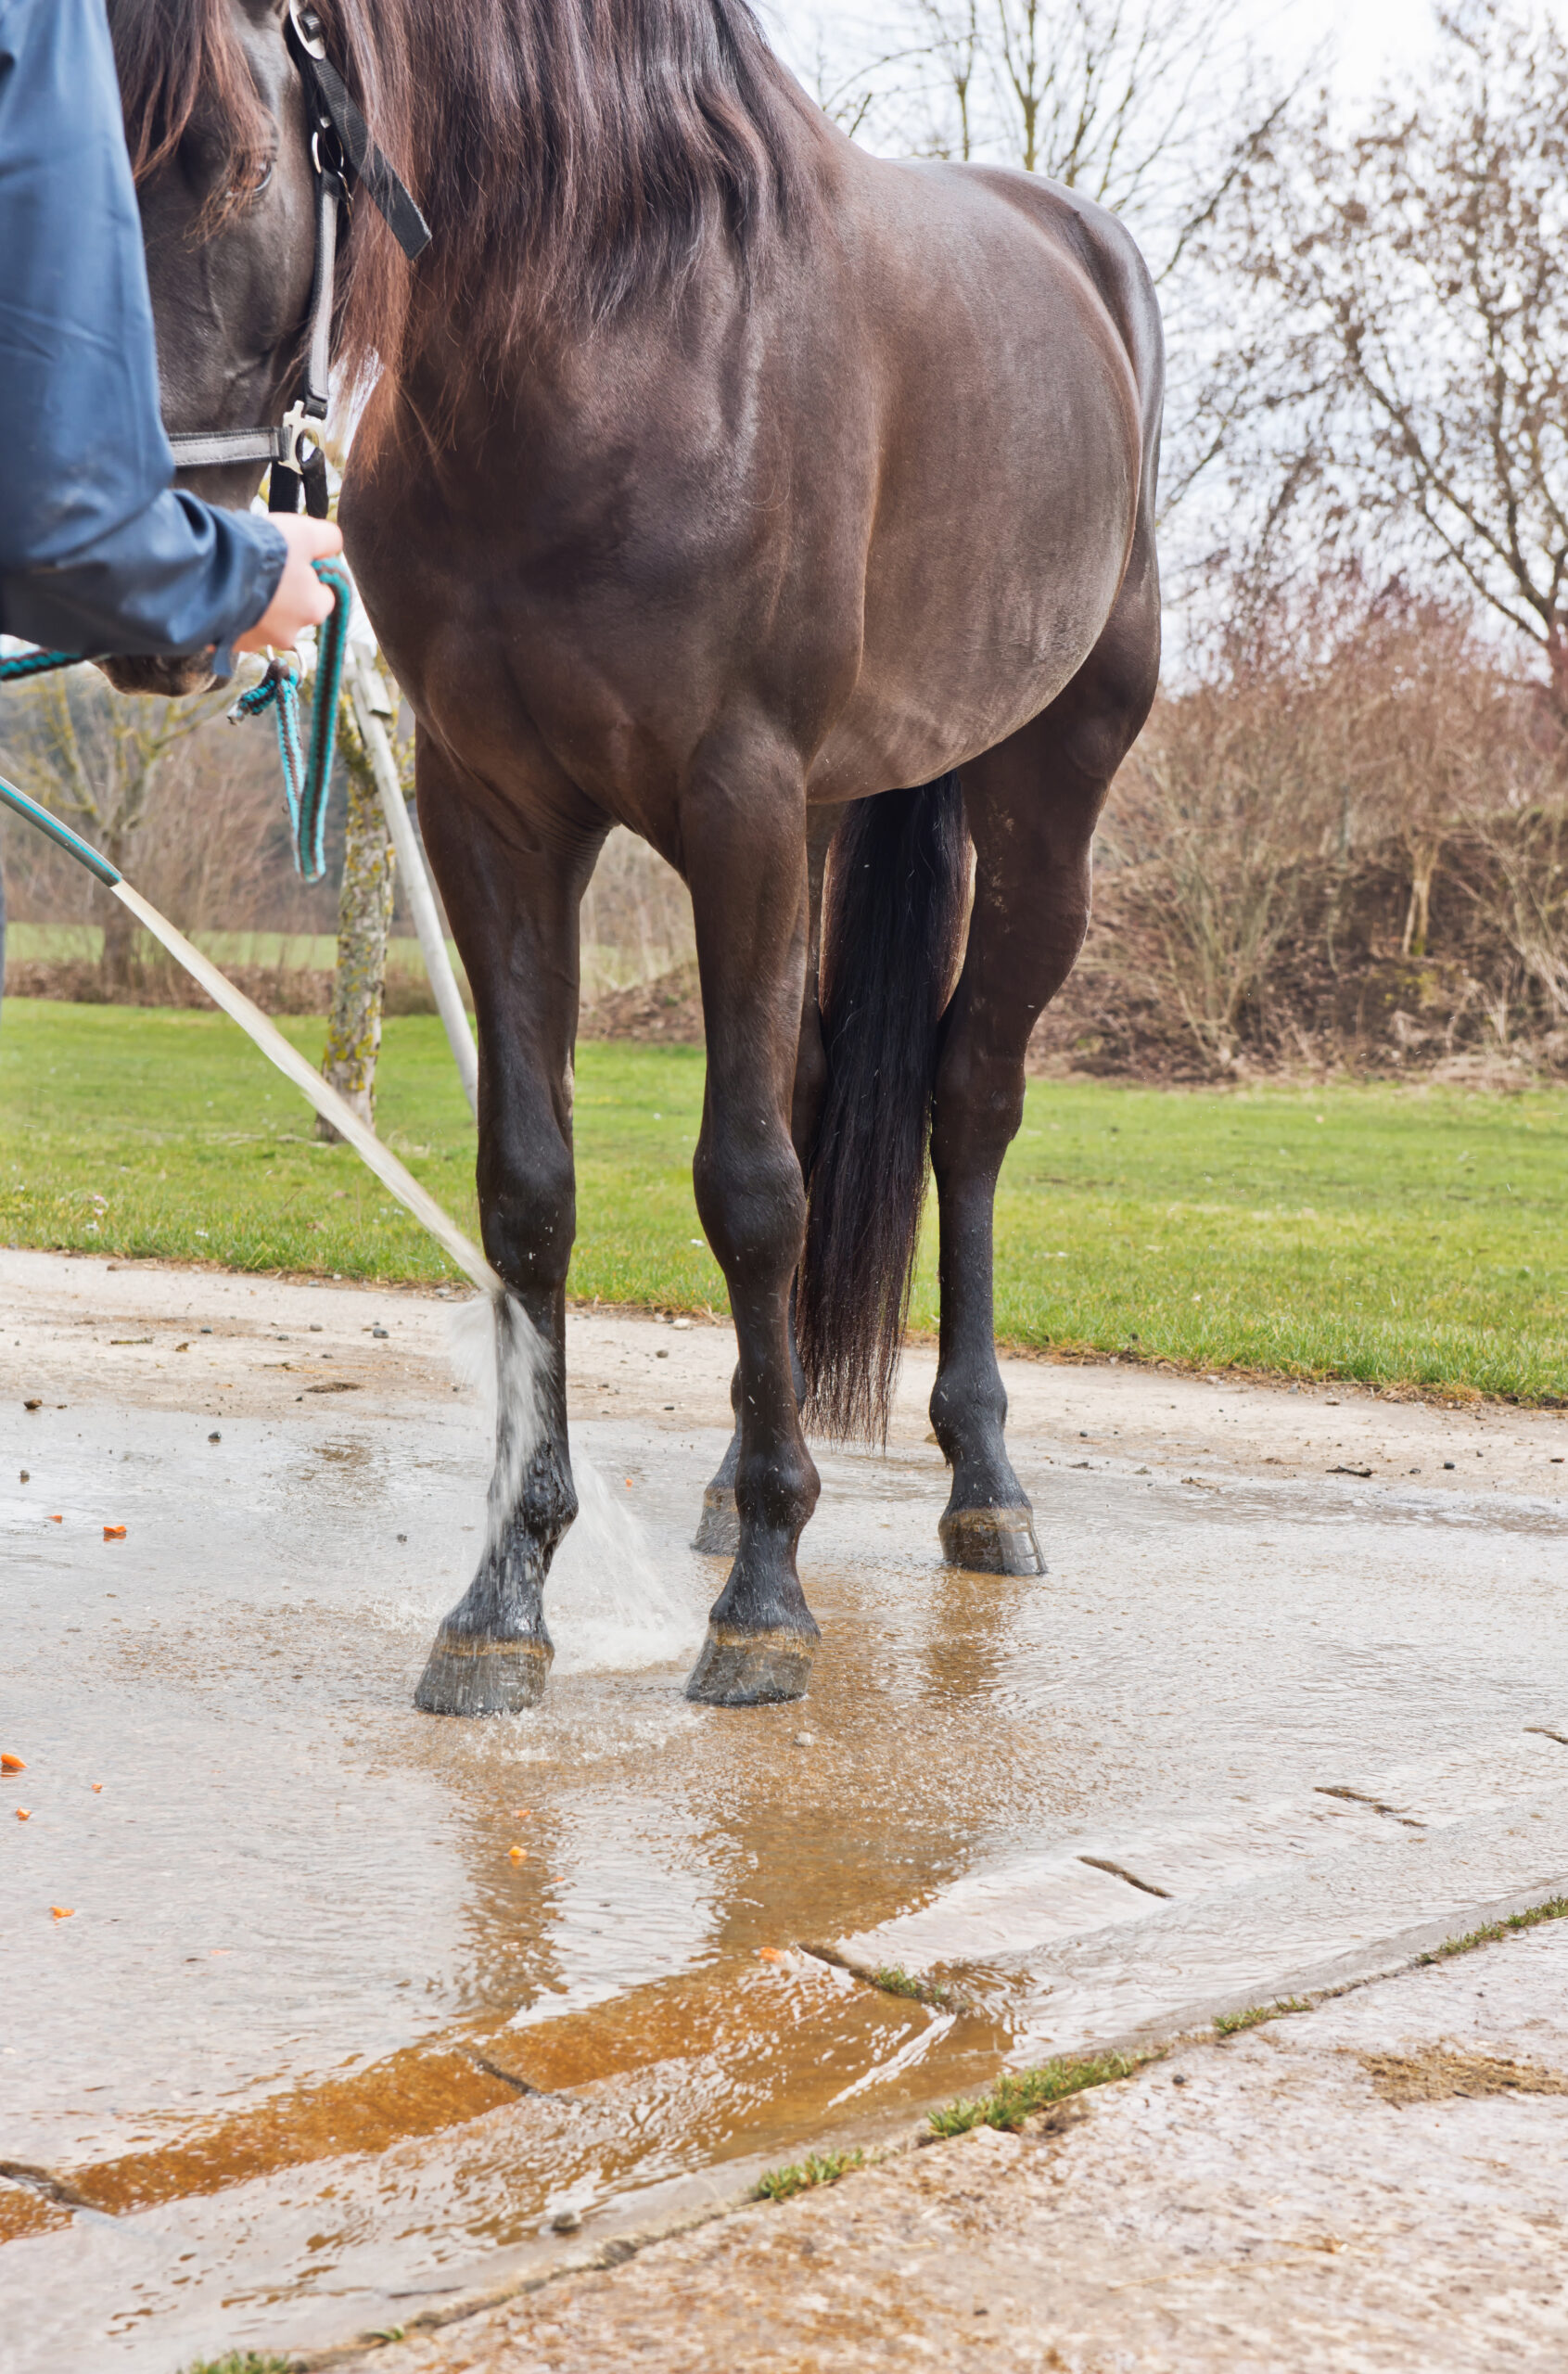 Can cold hosing hurt a horse’s legs? 